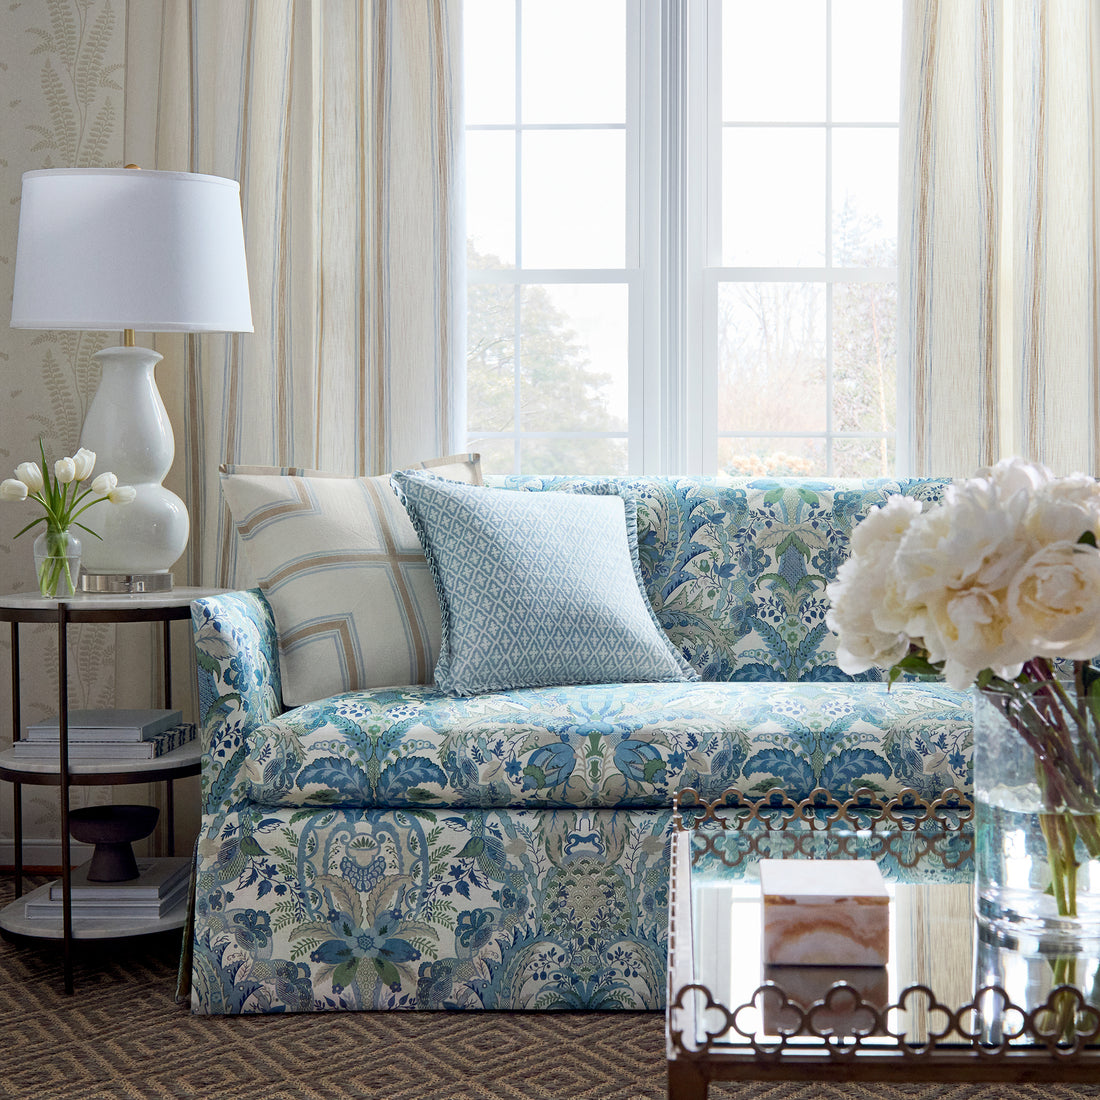 Addison Sofa with Skirt in Narbeth printed fabric in blue and green color - pattern number AF57858 by Anna French in the Bristol collection